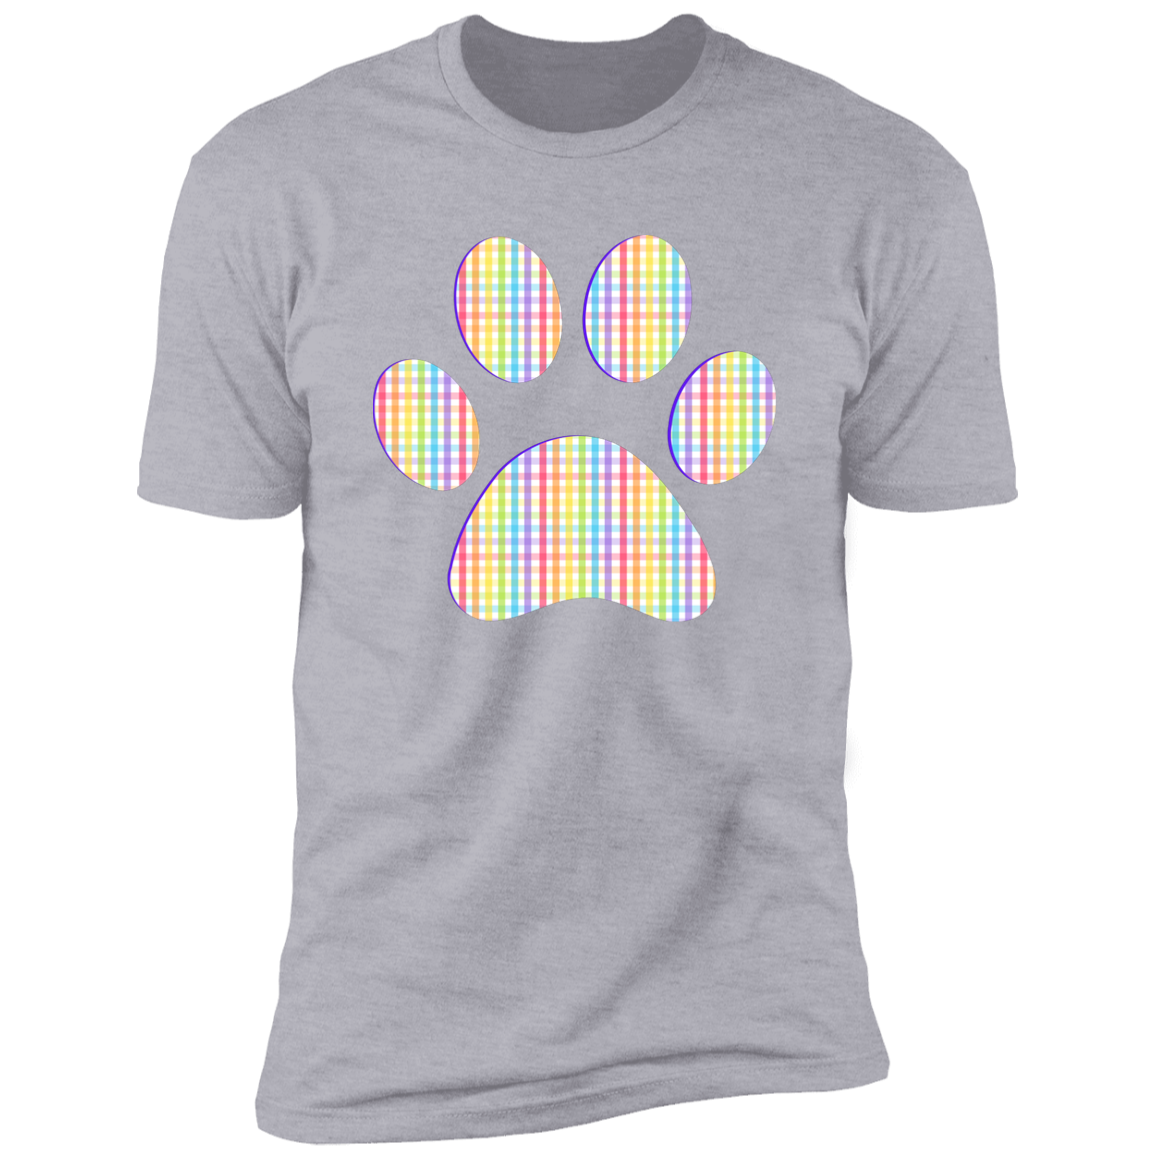 Pride Paw (Gingham) Pride T-shirt, Paw Pride Dog Shirt for humans, in light heather gray